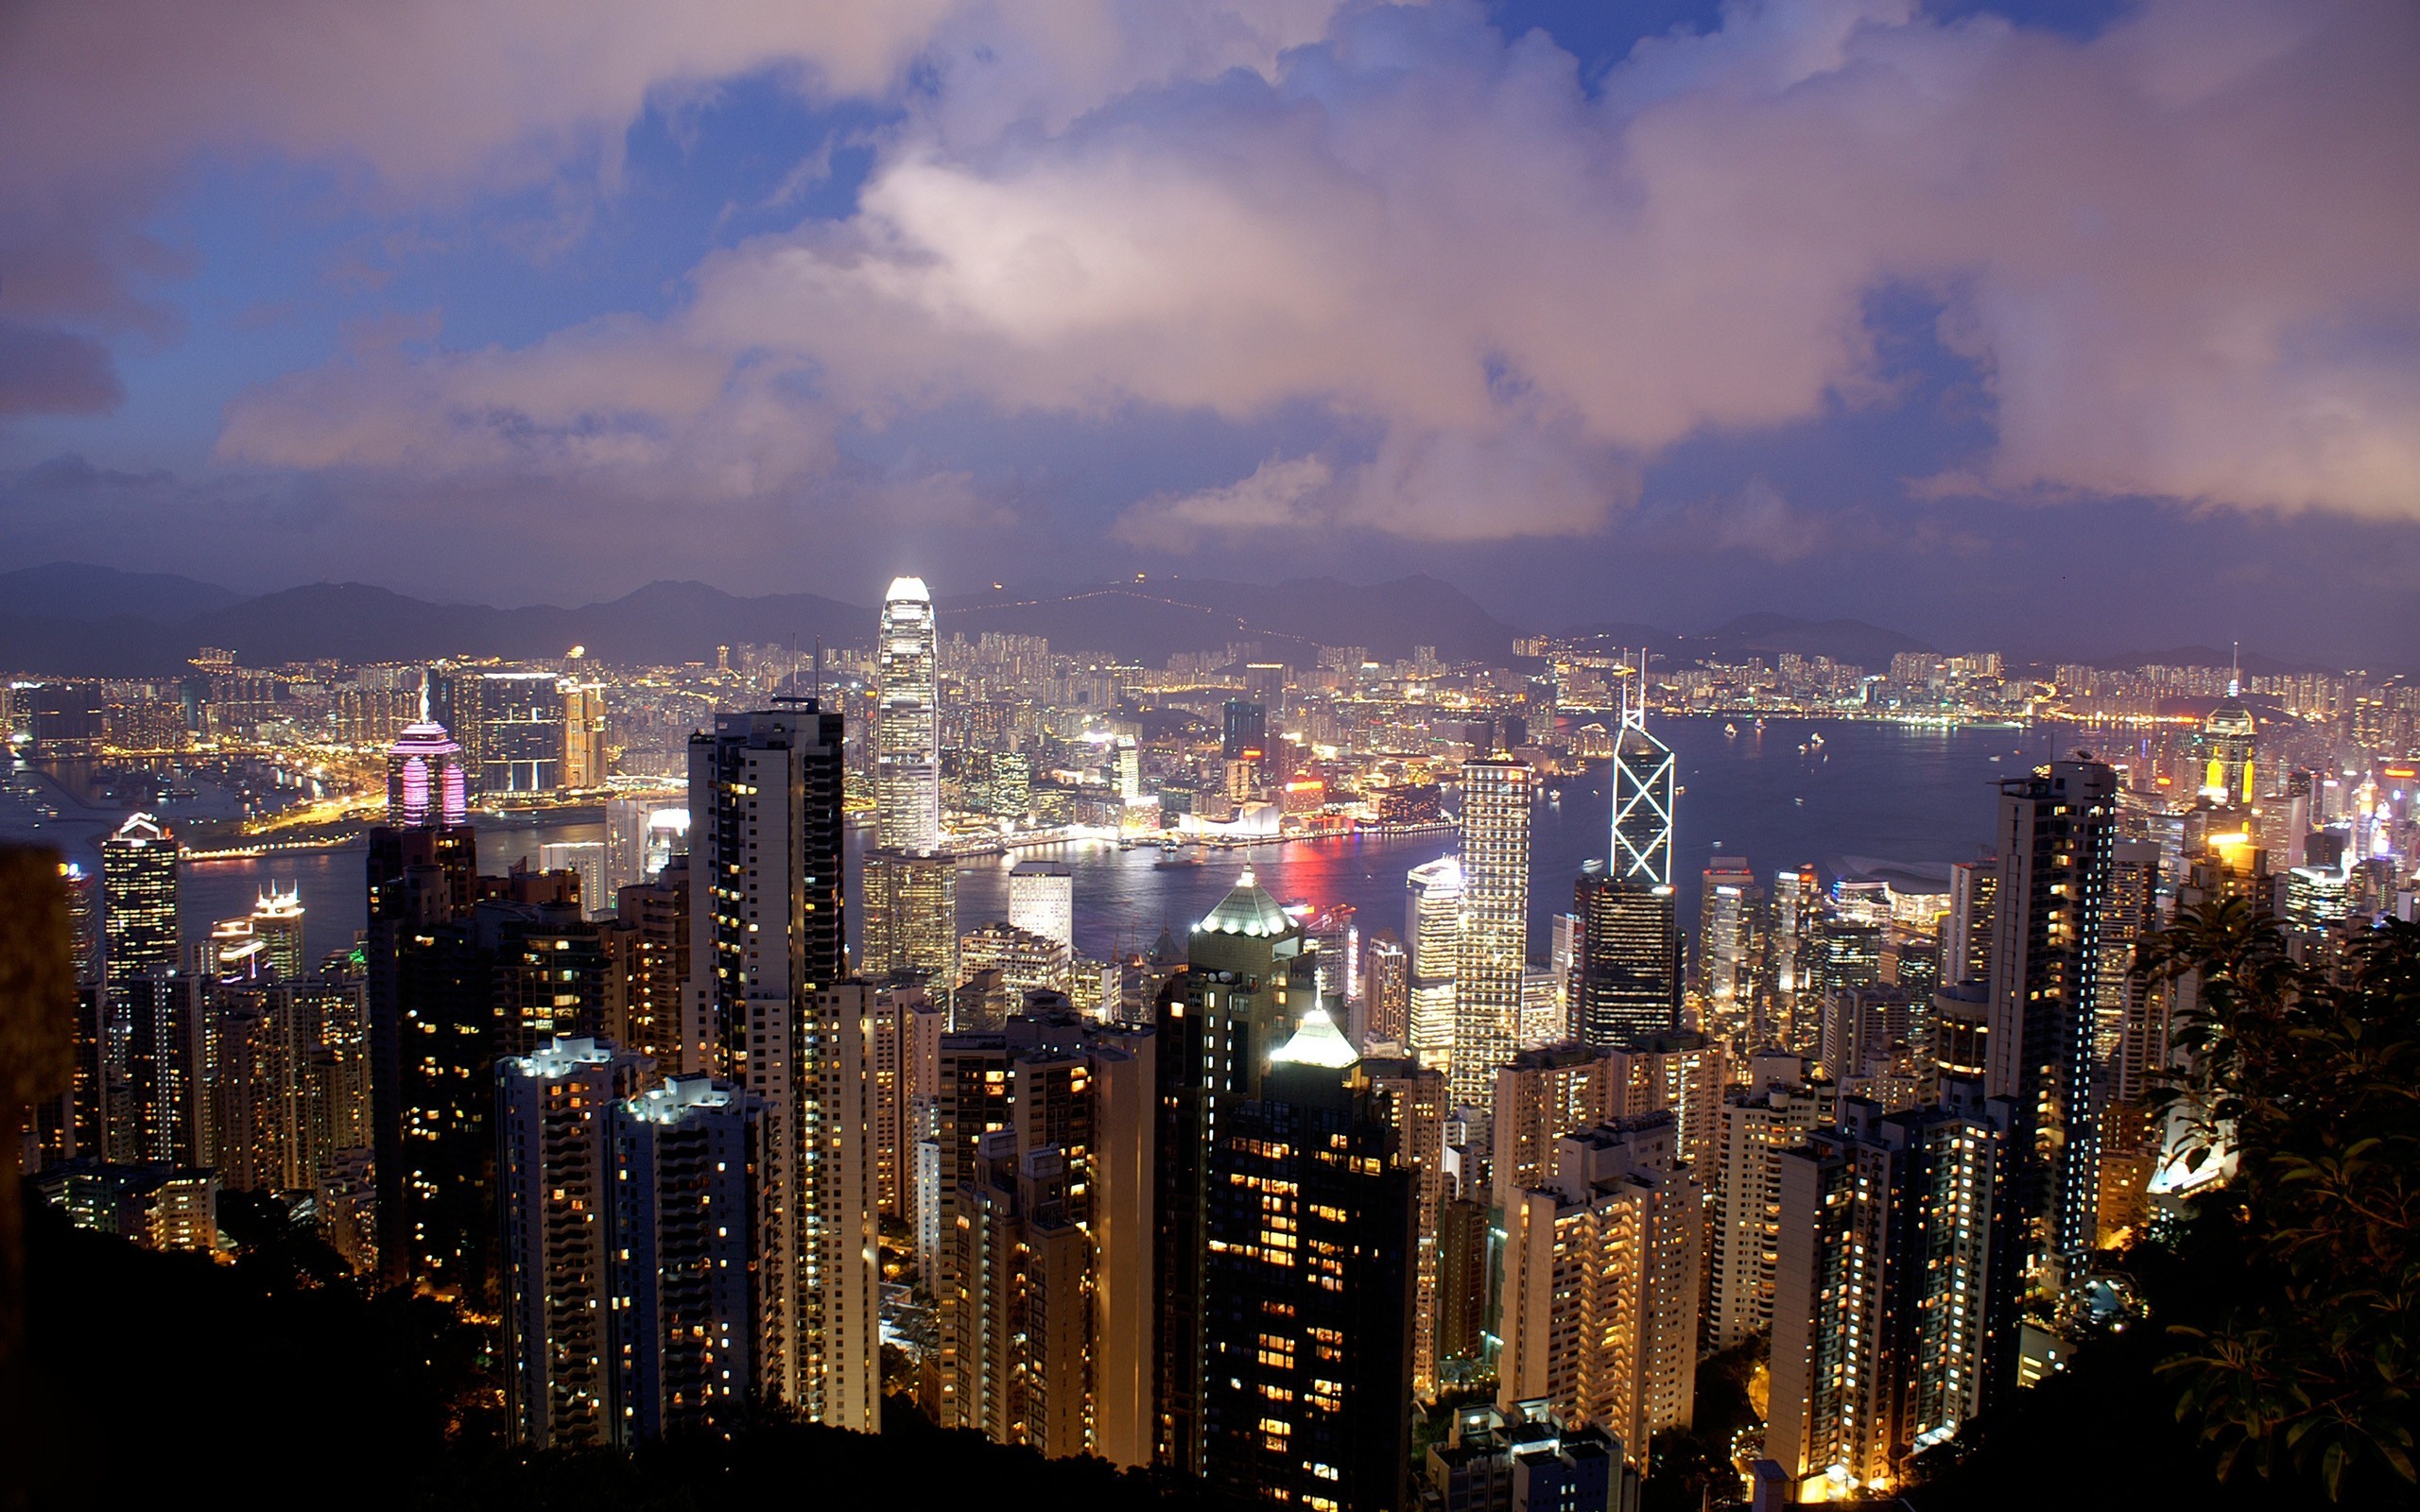 General 2560x1600 night cityscape city lights Victoria Harbour Hong Kong Asia low light